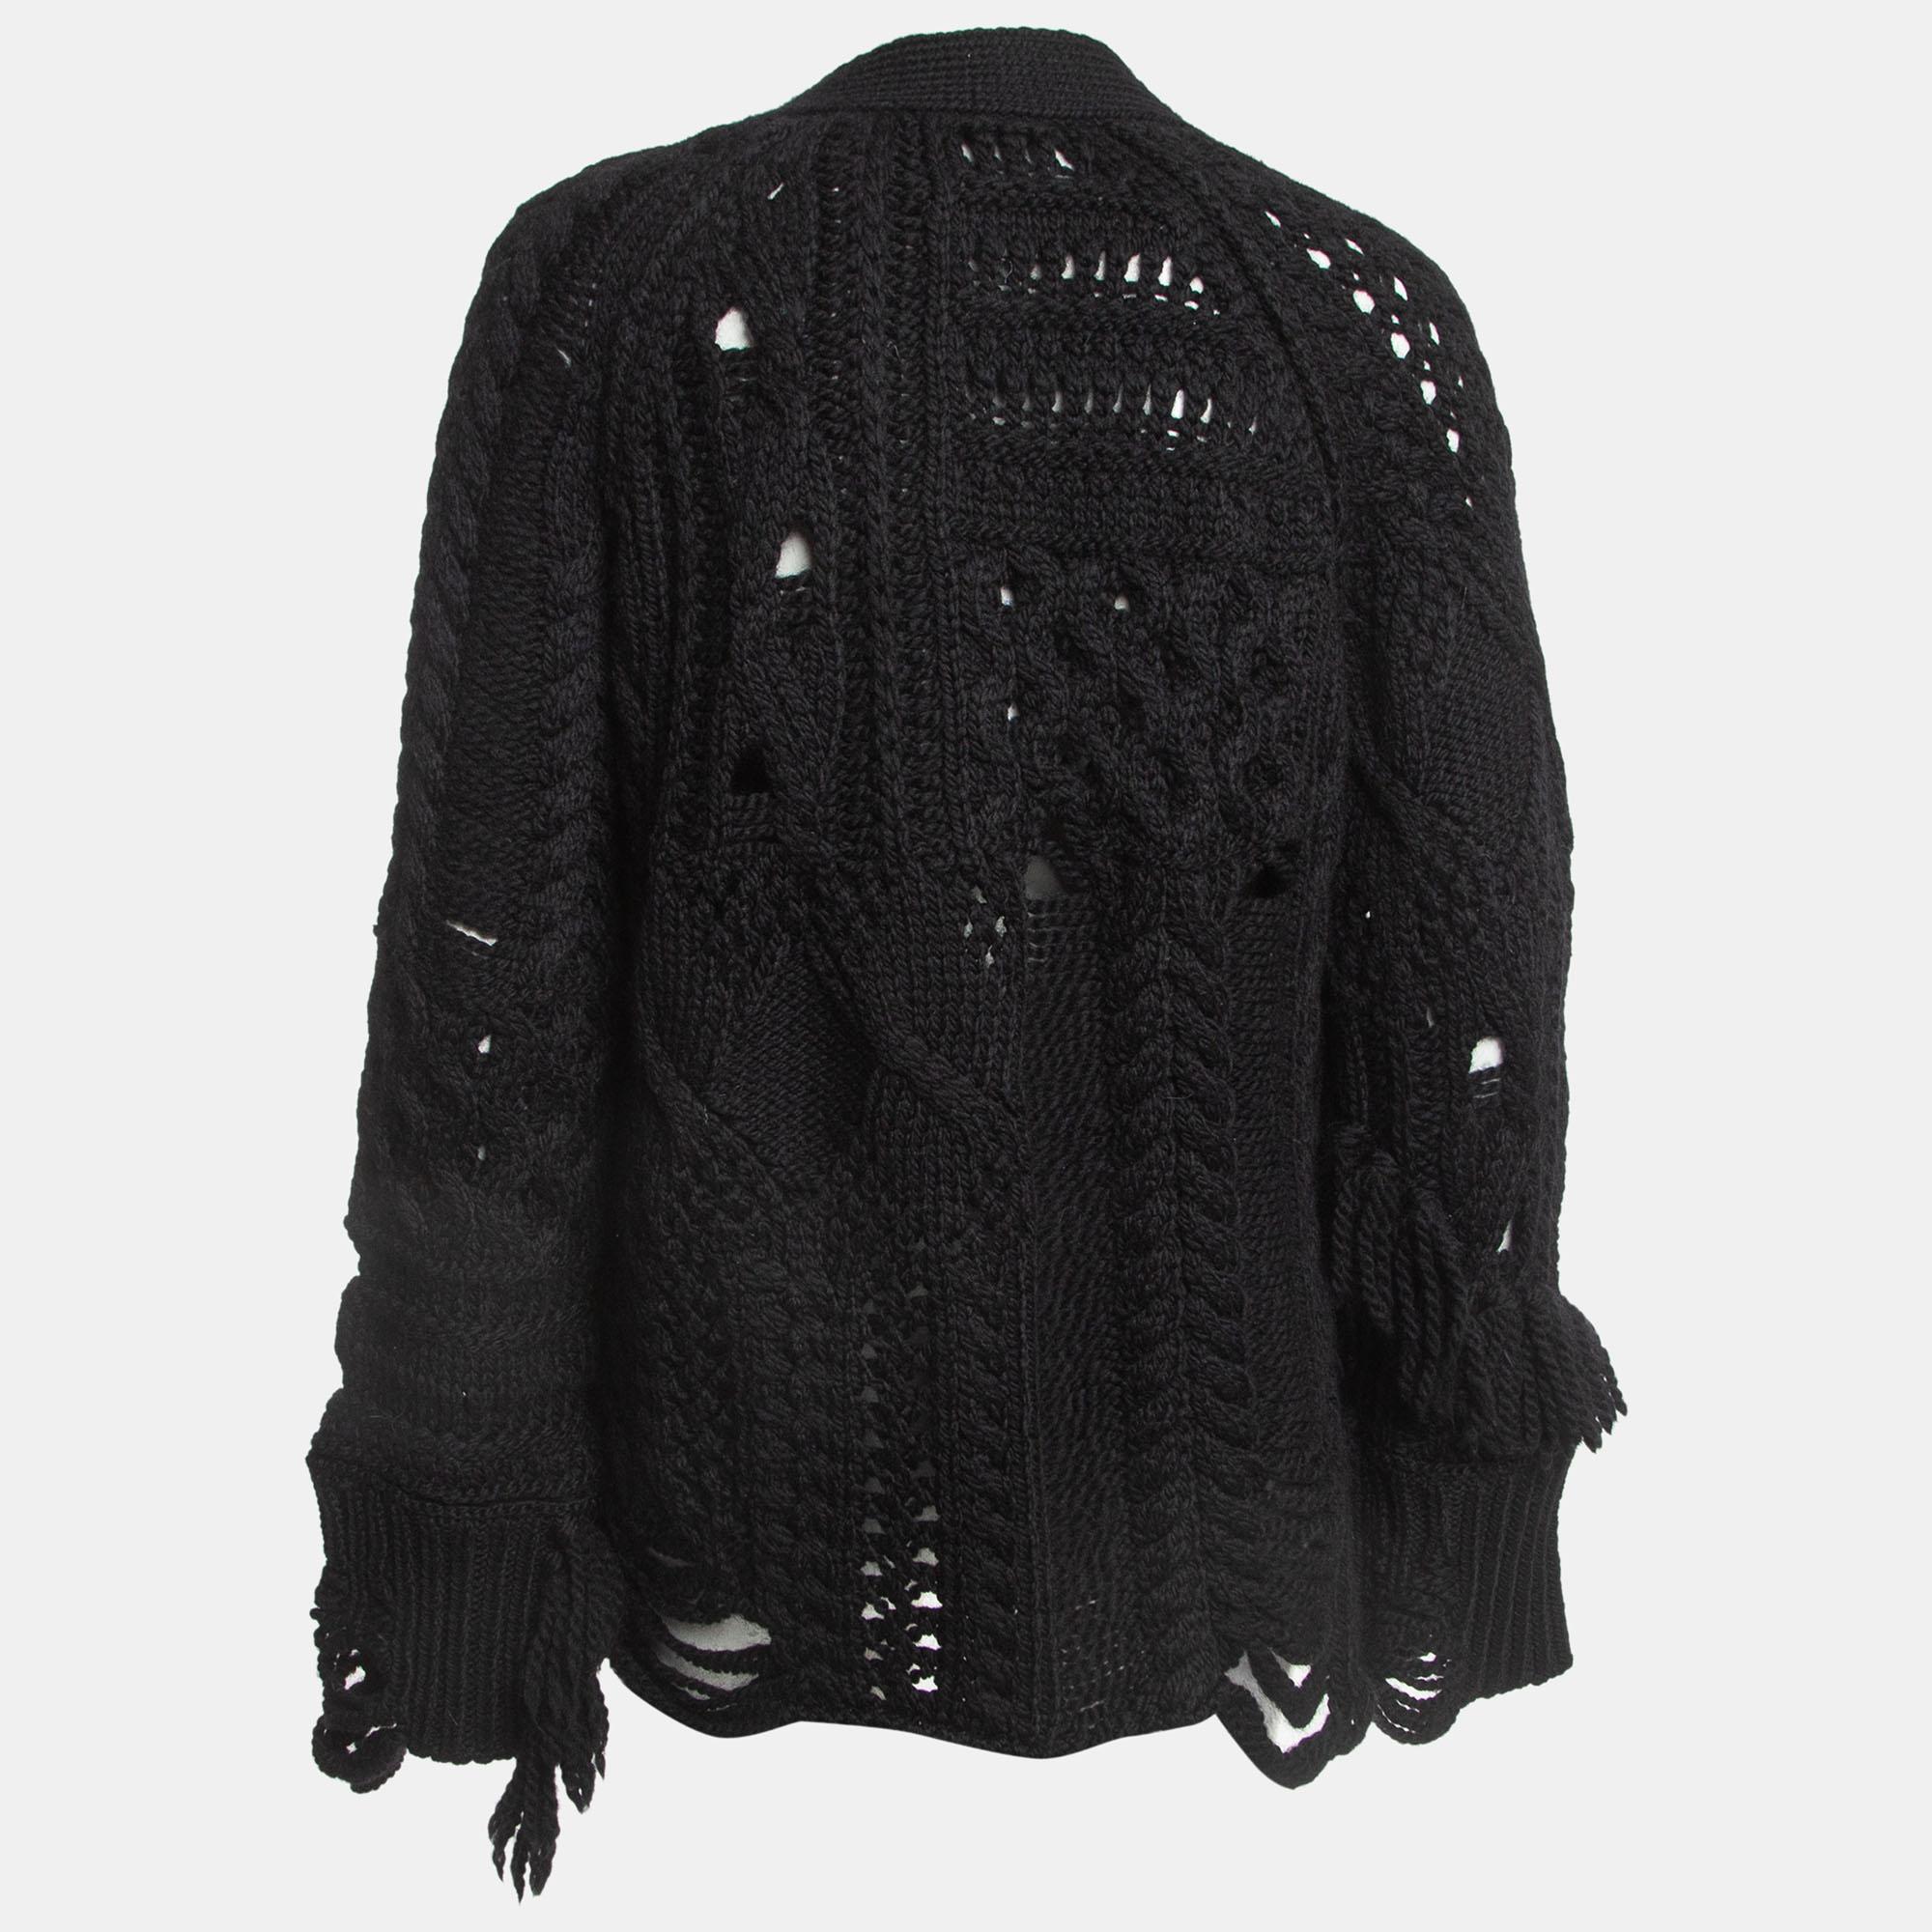 Flaunt your impressive styling choices as you wear this cardigan from Zadig & Voltaire. This cardigan can be styled with a pair of jeans and shoes to sport a casual look.

